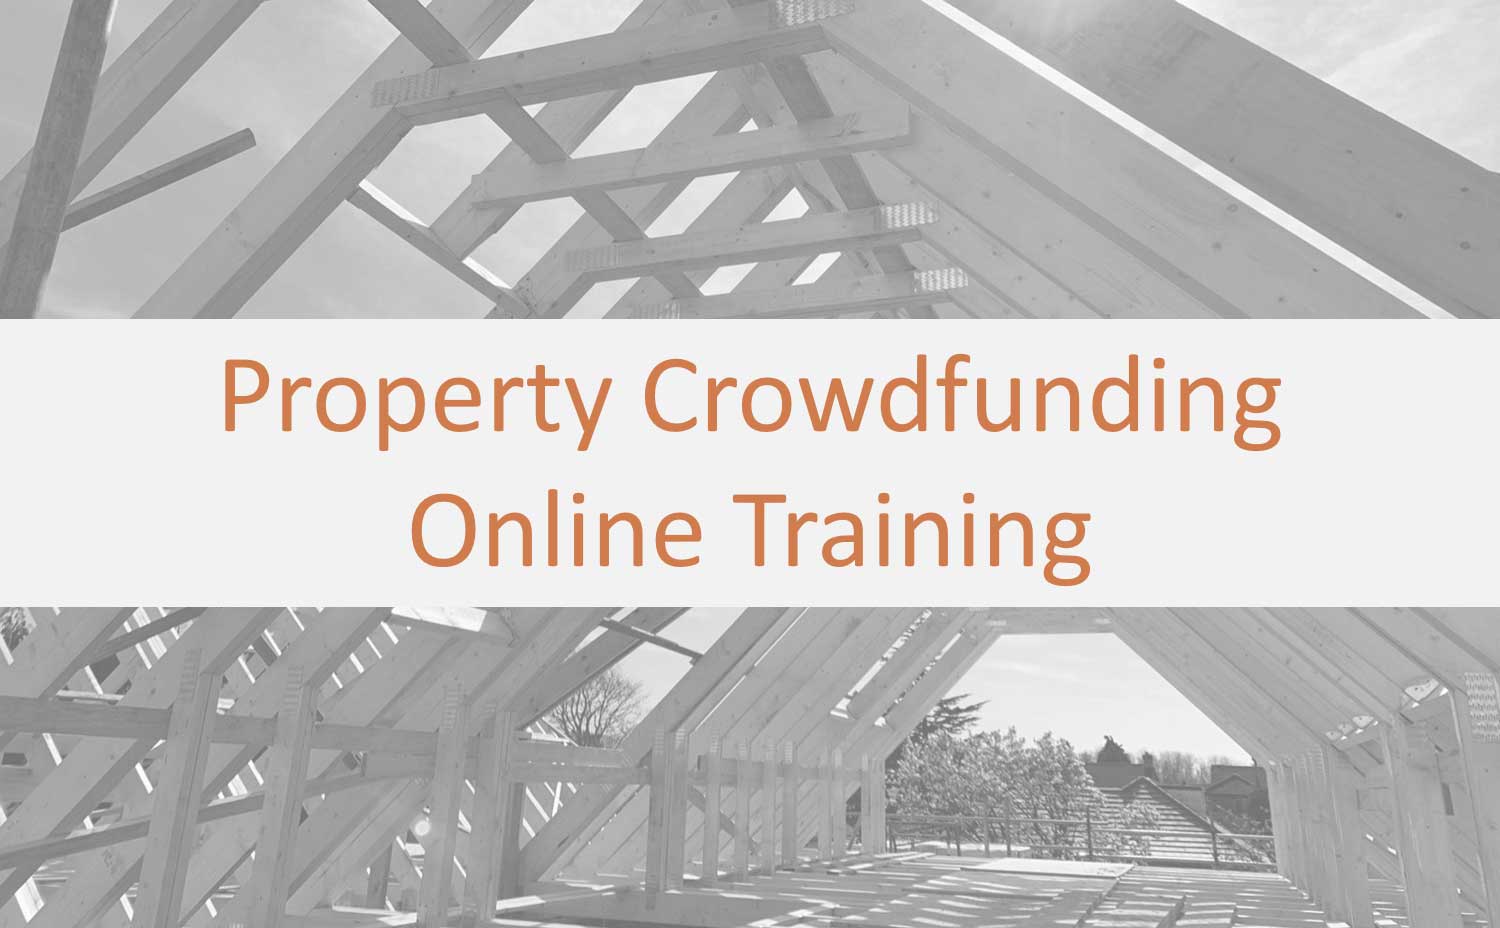 Increase Your Property Crowdfunding and Peer to Peer Lending Knowledge